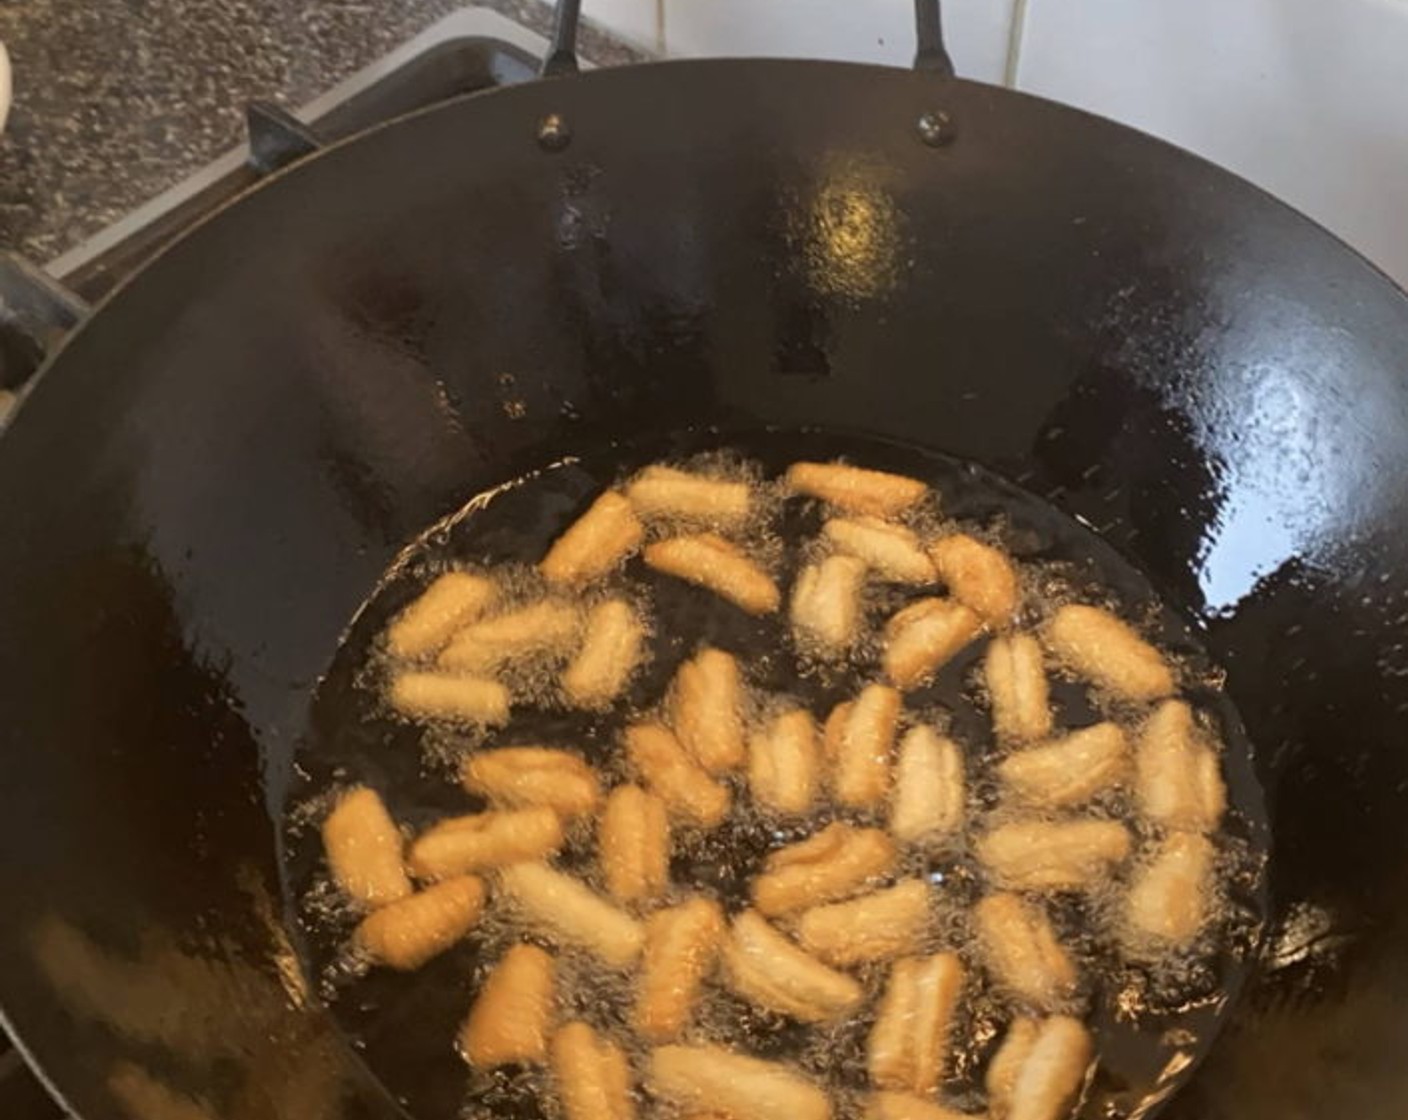 step 9 Fry a handful of kulkuls at a time. You want then to turn a golden brown. This should take about 3-4 minutes. Drain well on plates lined with paper towels.